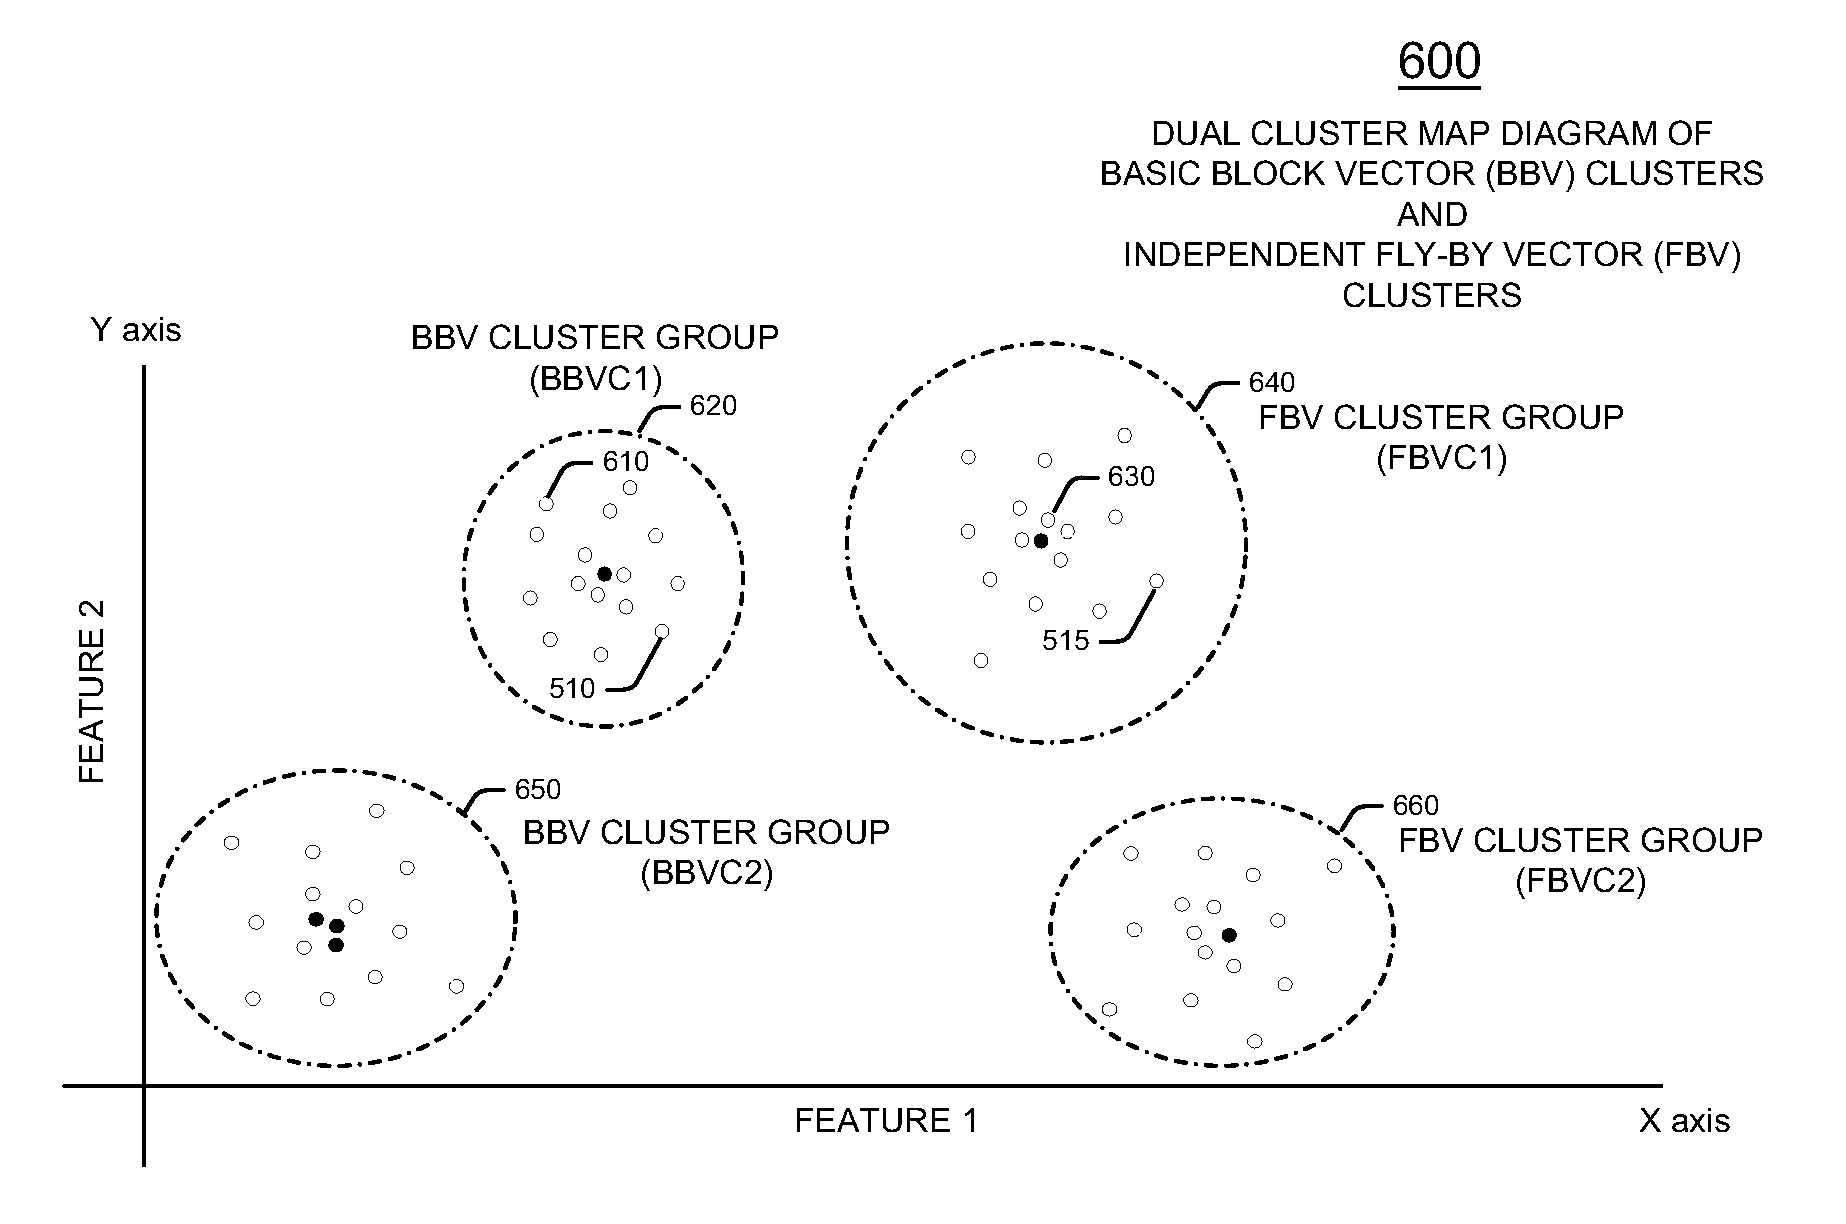 Method and apparatus for evaluating integrated circuit design model performance using basic block vectors and fly-by vectors including microarchitecture dependent information